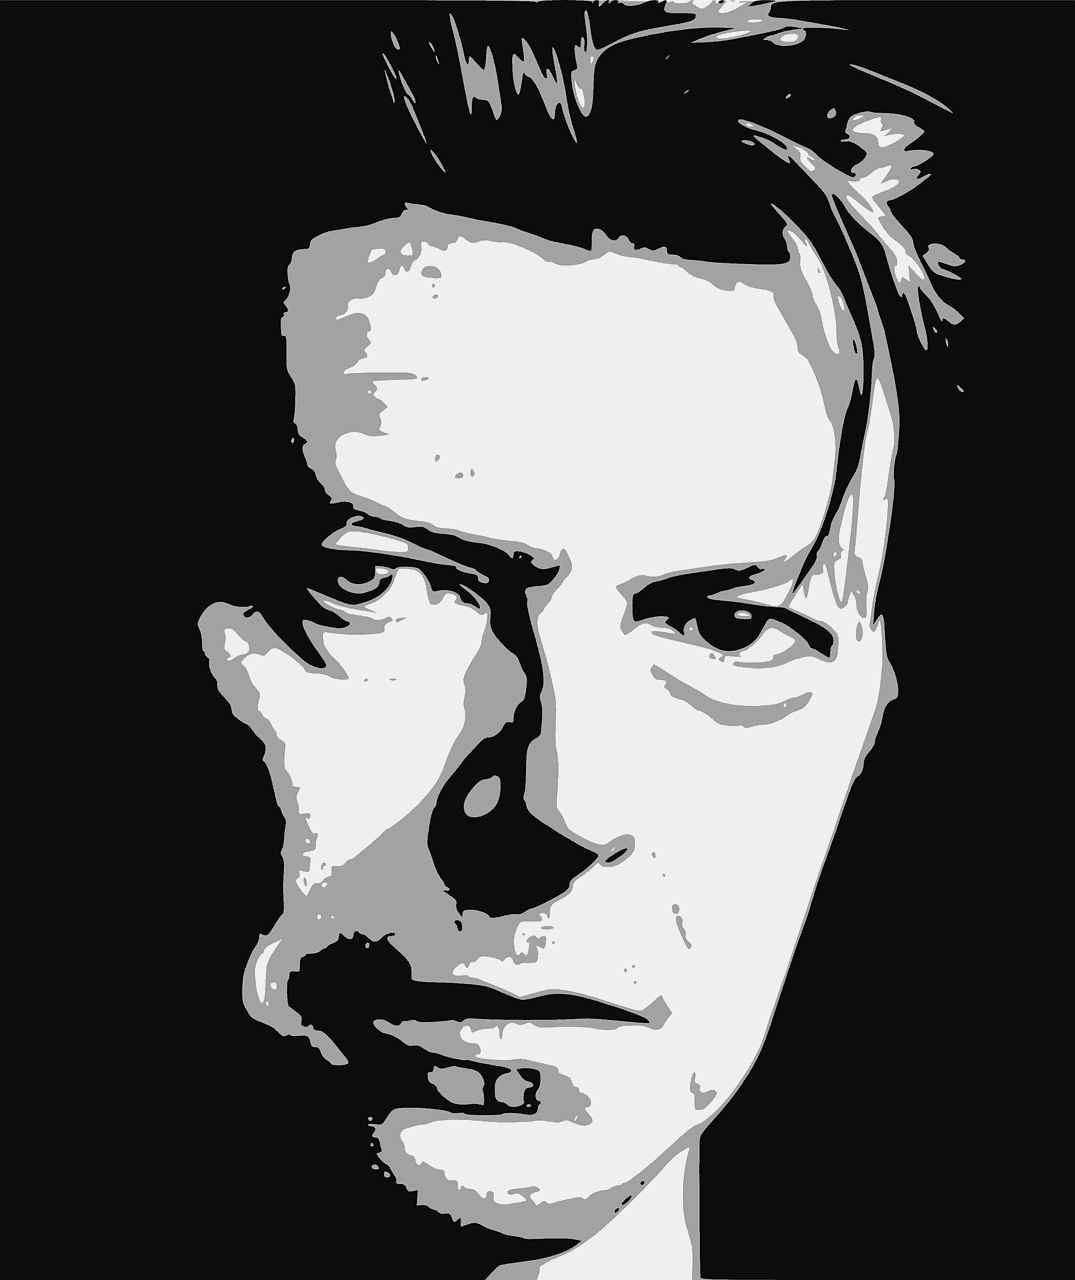 David Bowie's music changed my life